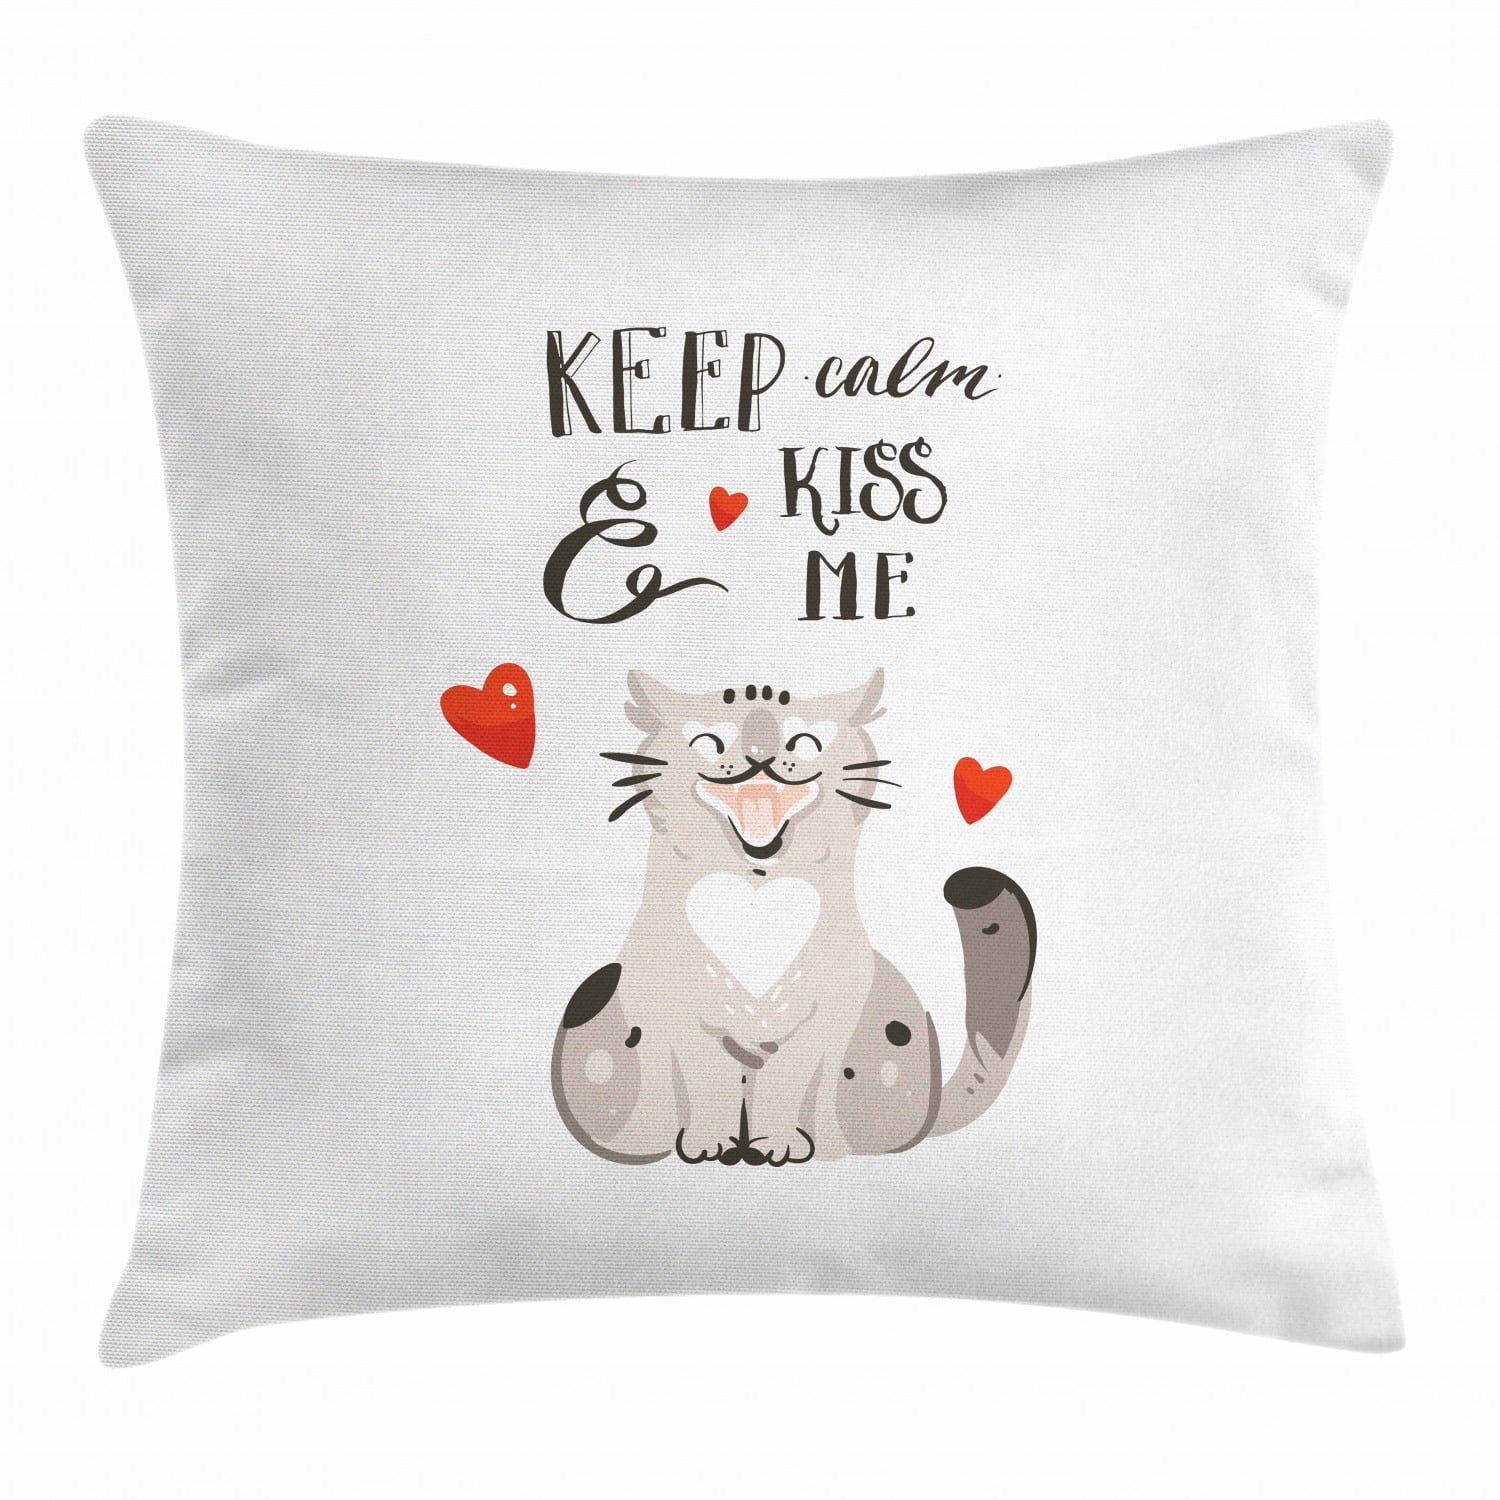 Valentine's Day Throw Pillow Cushion Cover, Love Cartoon Happy Cat with  Hand Written Kiss Me Quote, Decorative Square Accent Pillow Case, 18 X 18  Inches, Warm Taupe Vermilion and Black, by Ambesonne 